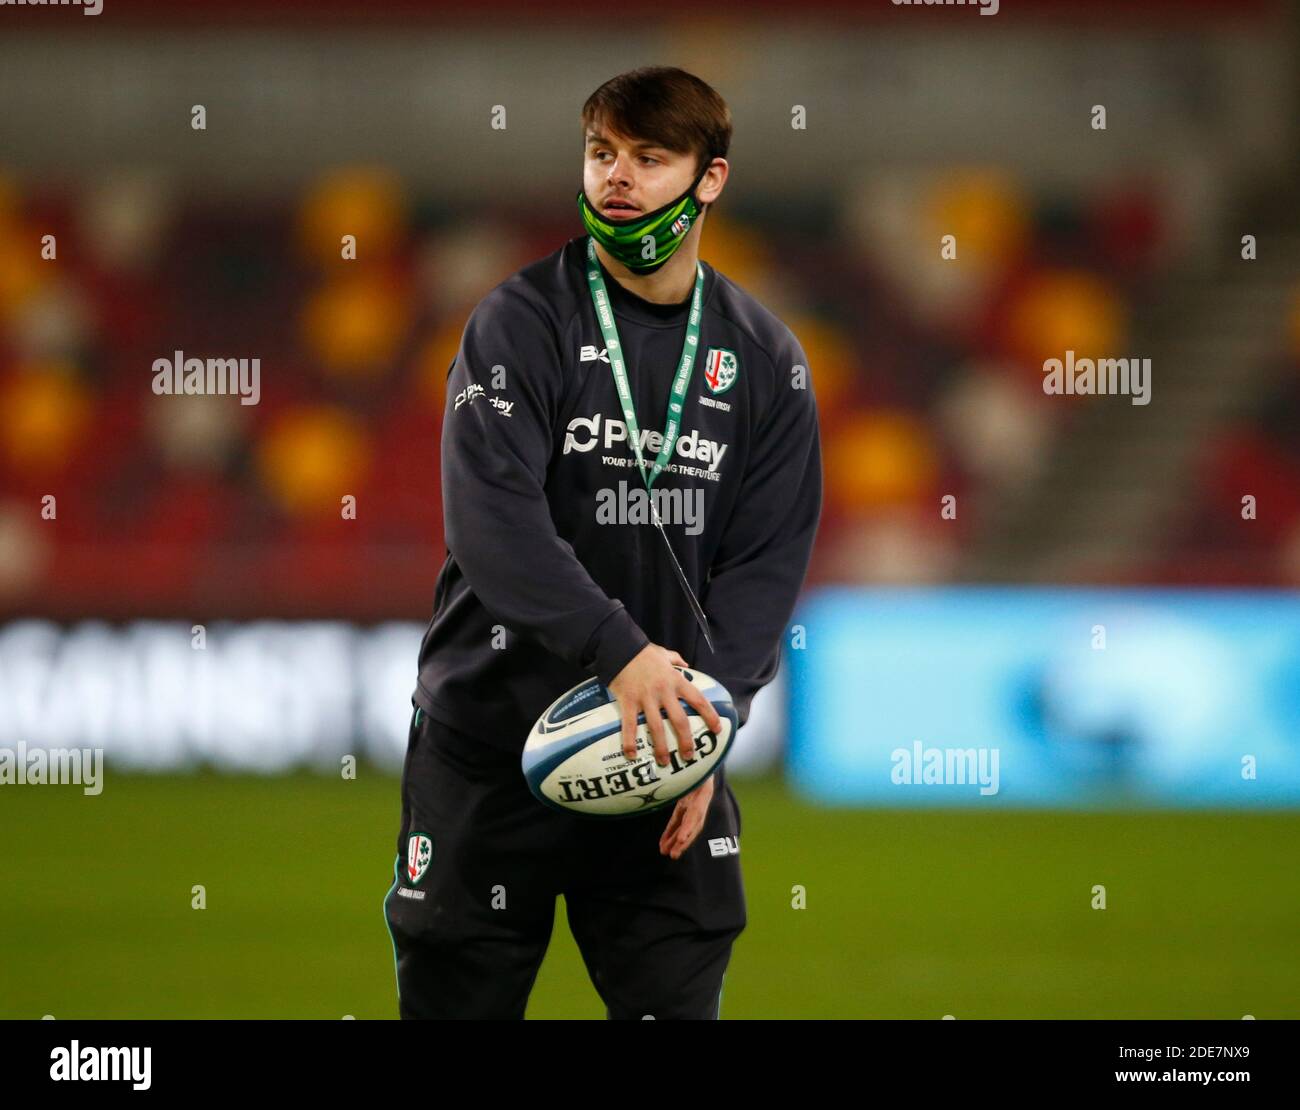 BRENTFORD, ENGLAND - NOVEMBER 29: Ball Boy Michael Dykas during Gallagher Premiership between London Irish and Leicester Tigers at Brentford Community Stadium, Brentford, UK on 29th November 2020 Credit: Action Foto Sport/Alamy Live News Stock Photo